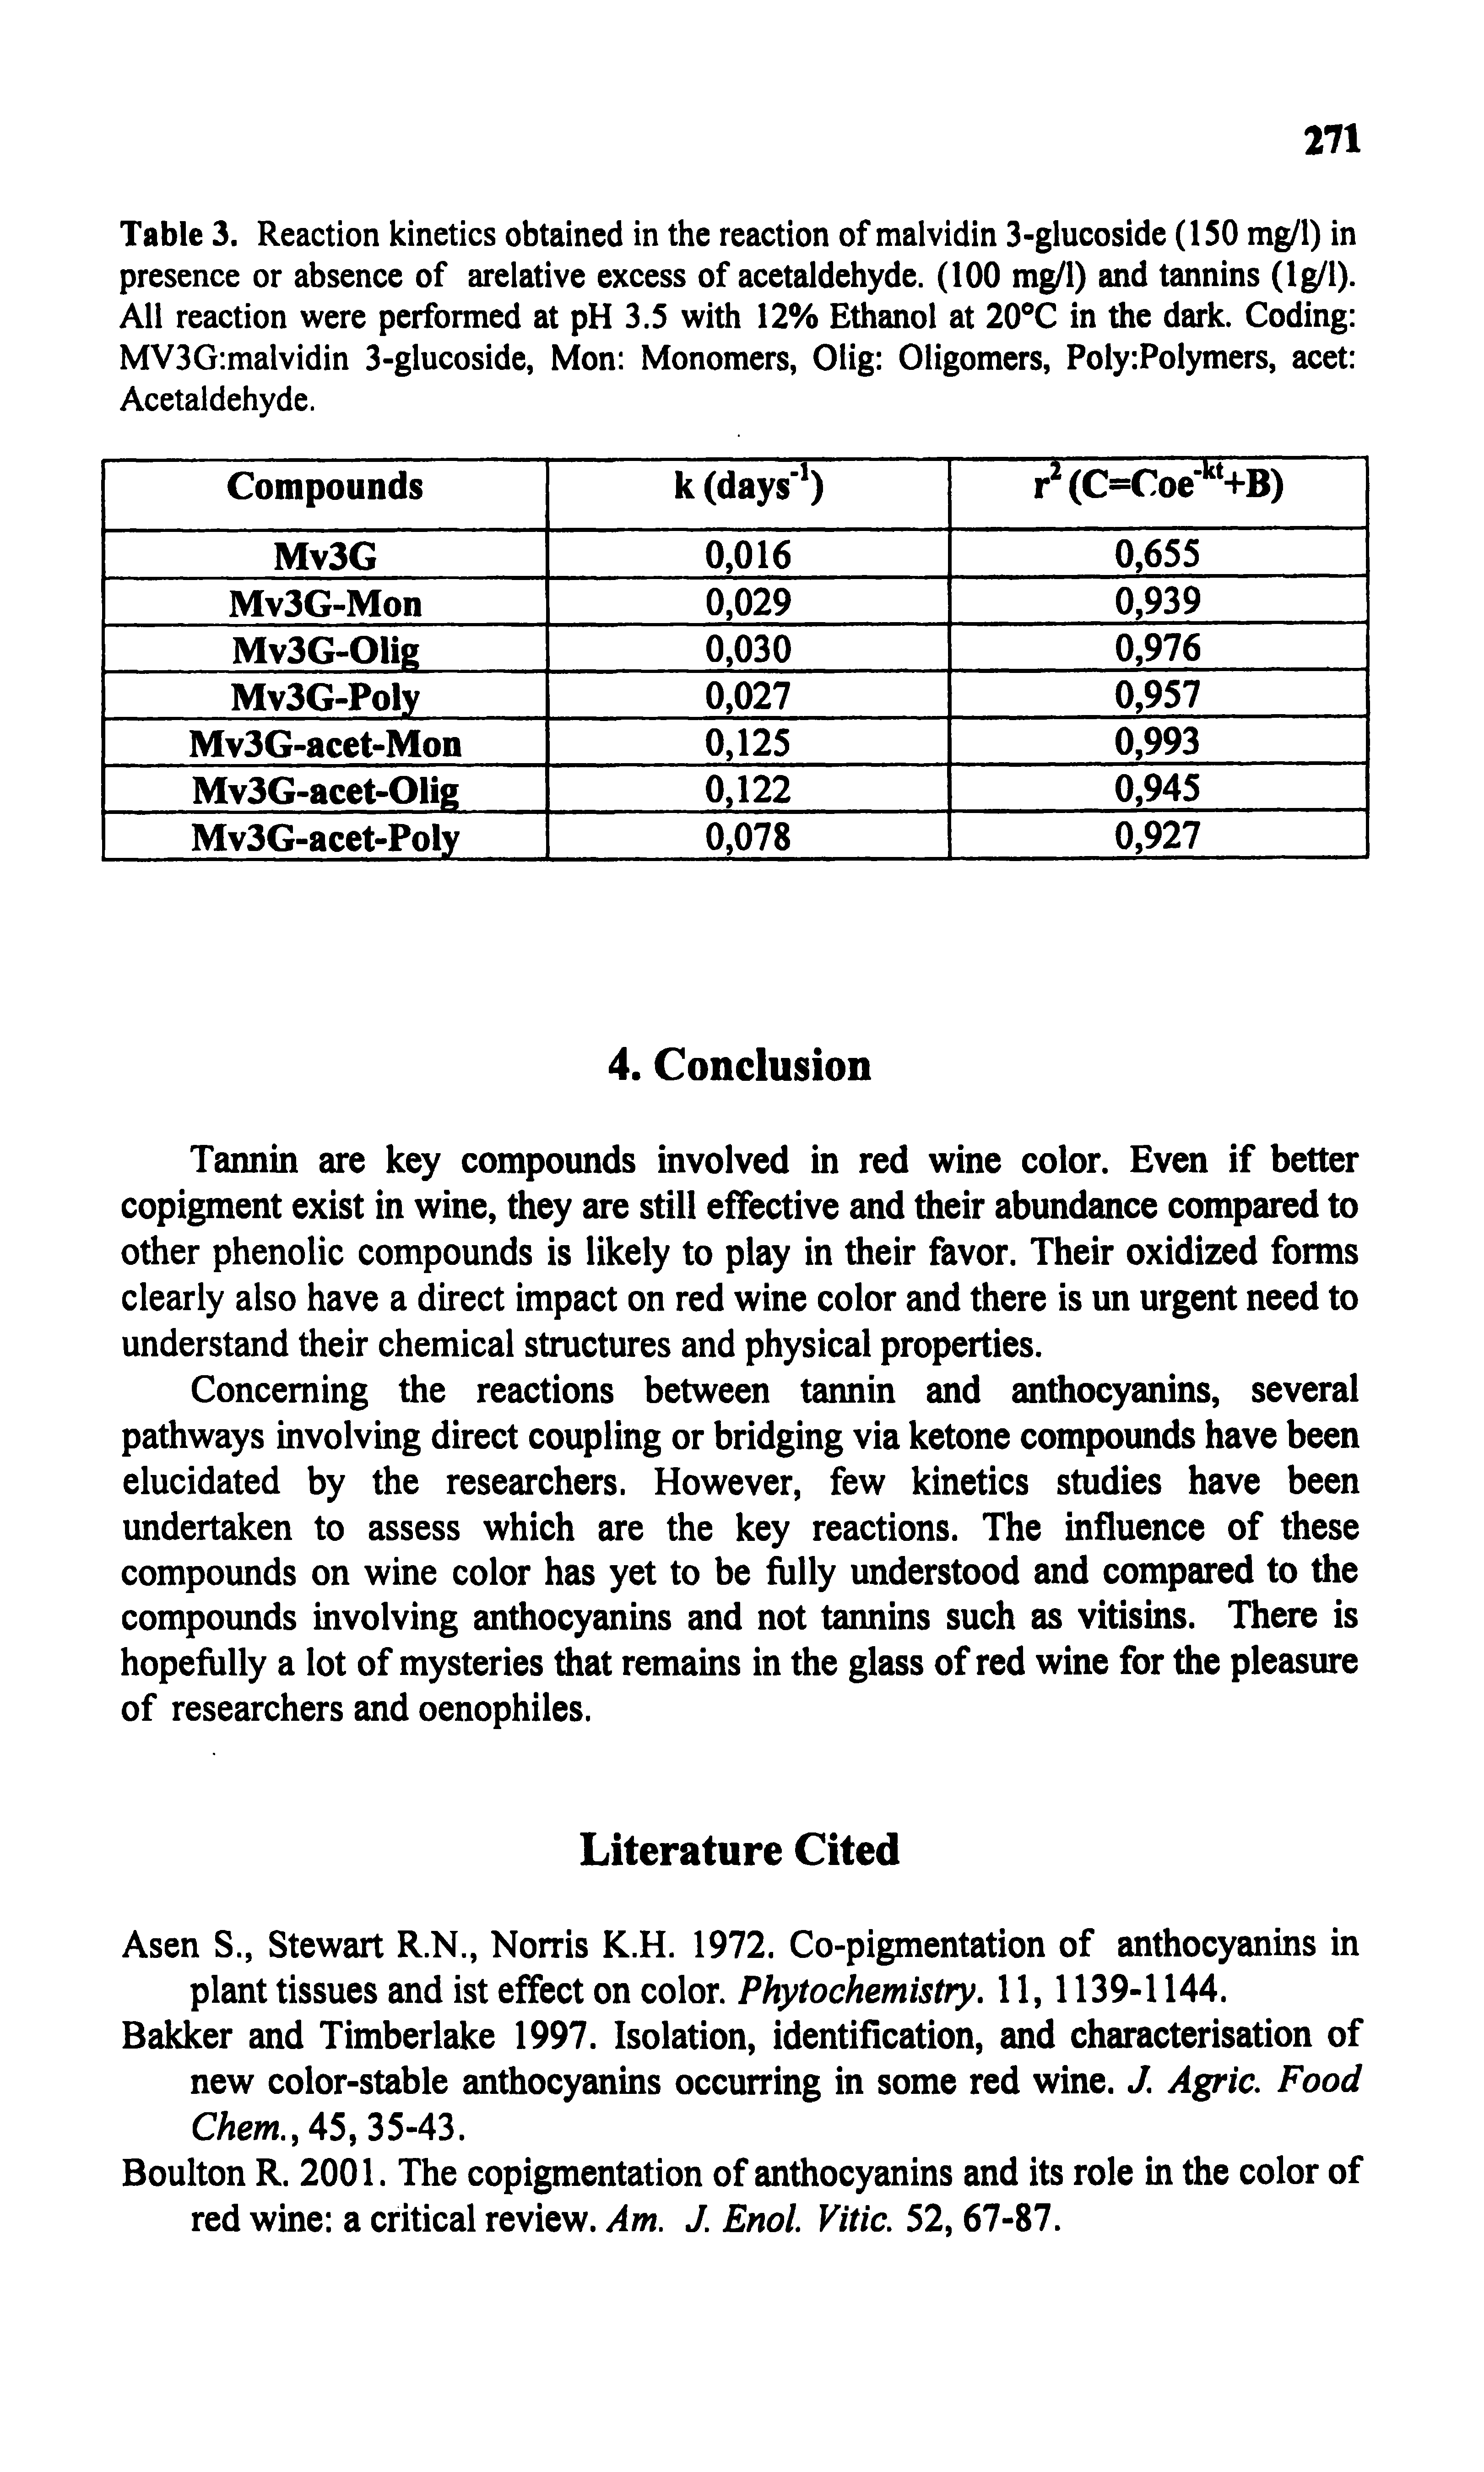 Table 3. Reaction kinetics obtained in the reaction of malvidin 3-glucoside (ISO mg/1) in presence or absence of arelative excess of acetaldehyde. (100 mg/1) and tannins (lg/1). All reaction were performed at pH 3.5 with 12% Ethanol at 20 C in the dark. Coding MV3G malvidin 3-glucoside, Mon Monomers, Olig Oligomers, Poly Polymers, acet Acetaldehyde.